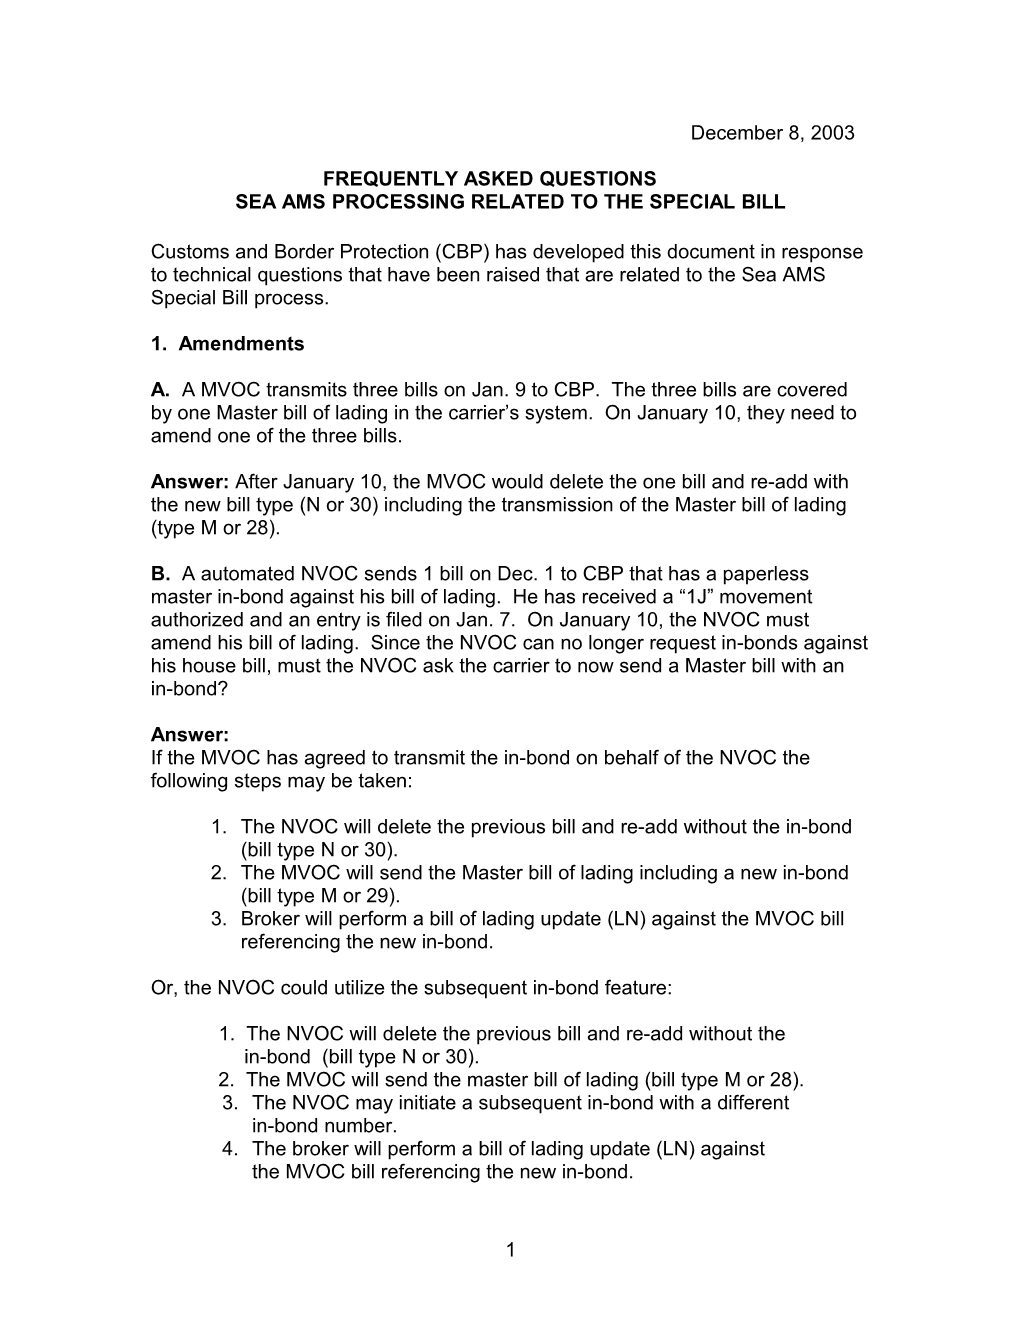 Frequently Asked Questions of Sea AMS Processing Related to the Special Bill